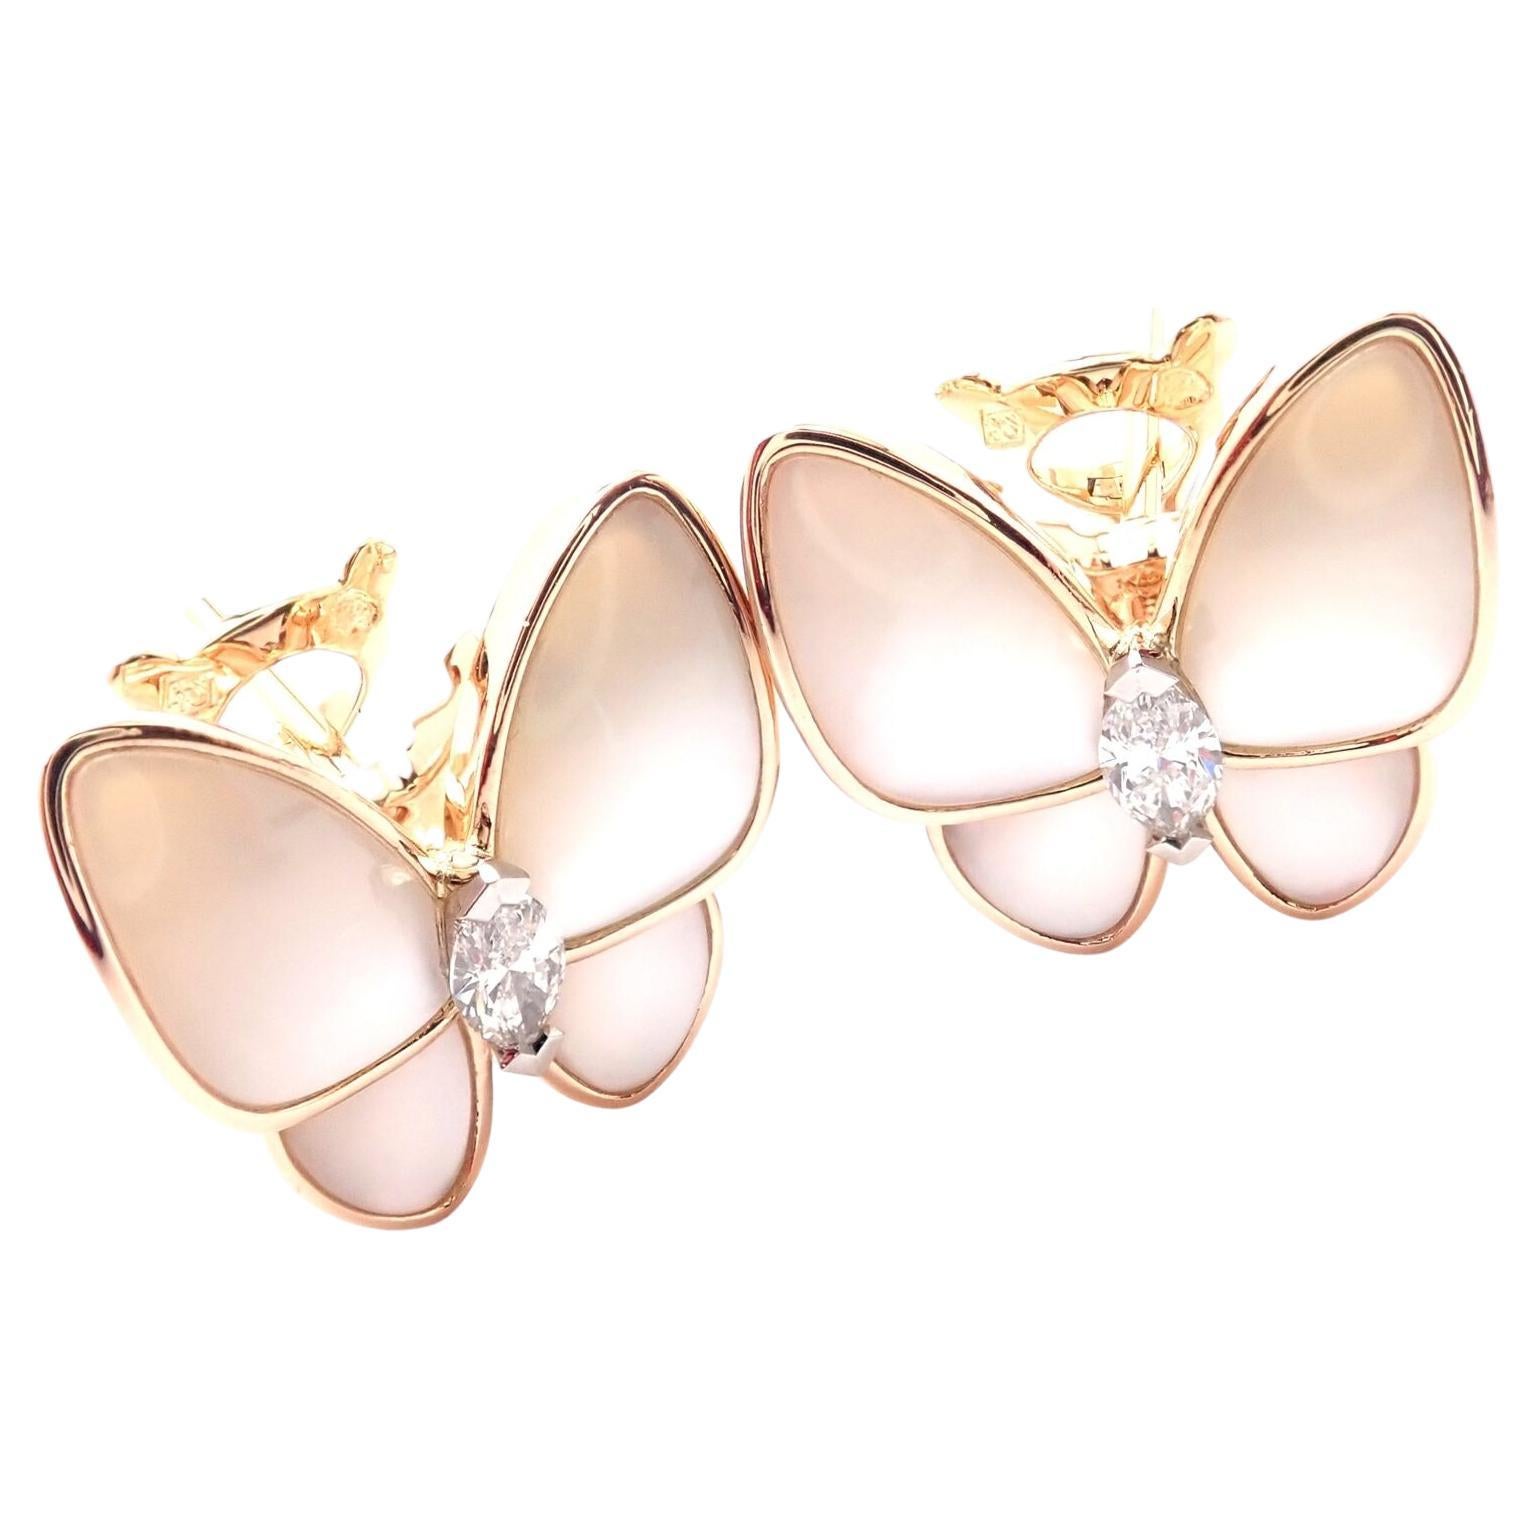 18k Rose Gold Two Butterfly Diamond And Mother Of Pearl  Earrings by Van Cleef & Arpels.
With 2 marque shape diamonds VVS1 clarity, E color total weight .31ct
8 Mother of pearl stones.
These earrings are for pierced ears.
These earrings come with